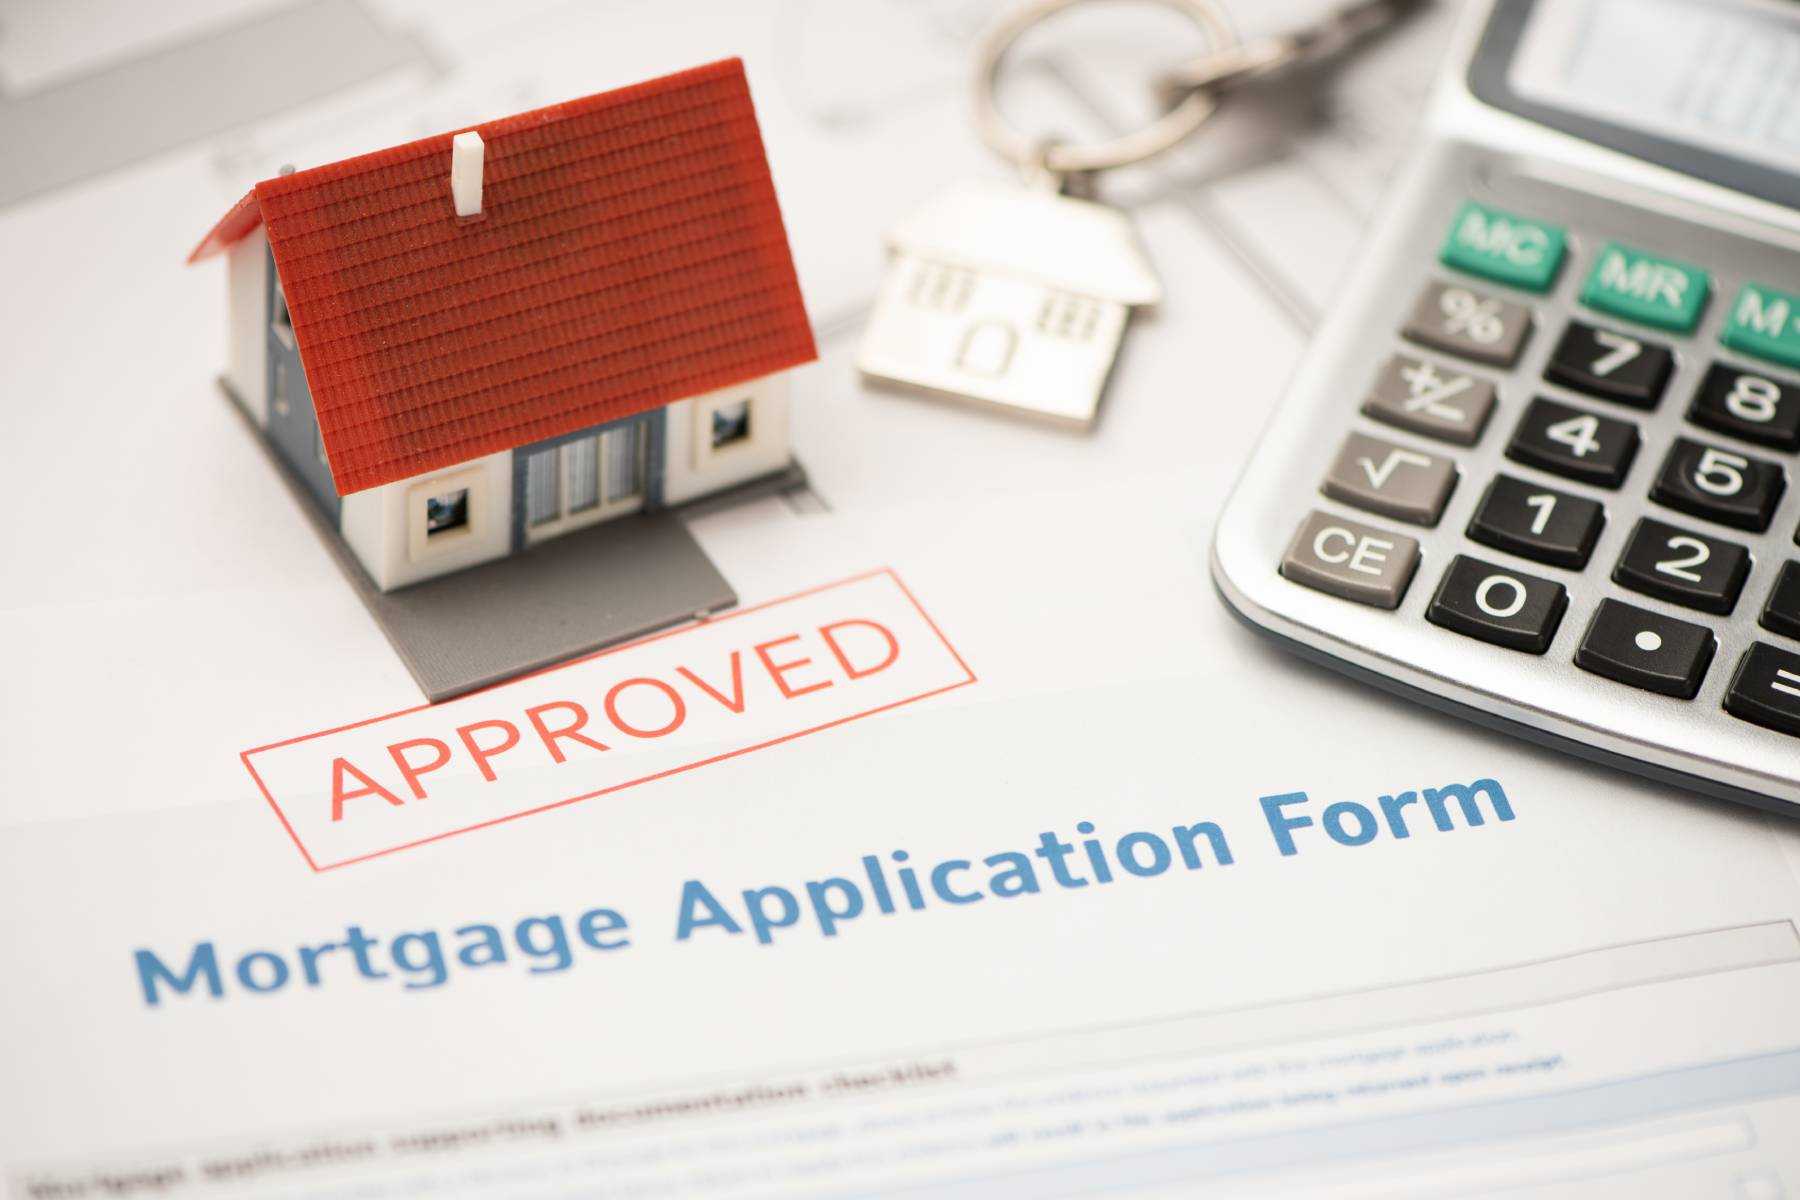 How do 5% deposit mortgages work?